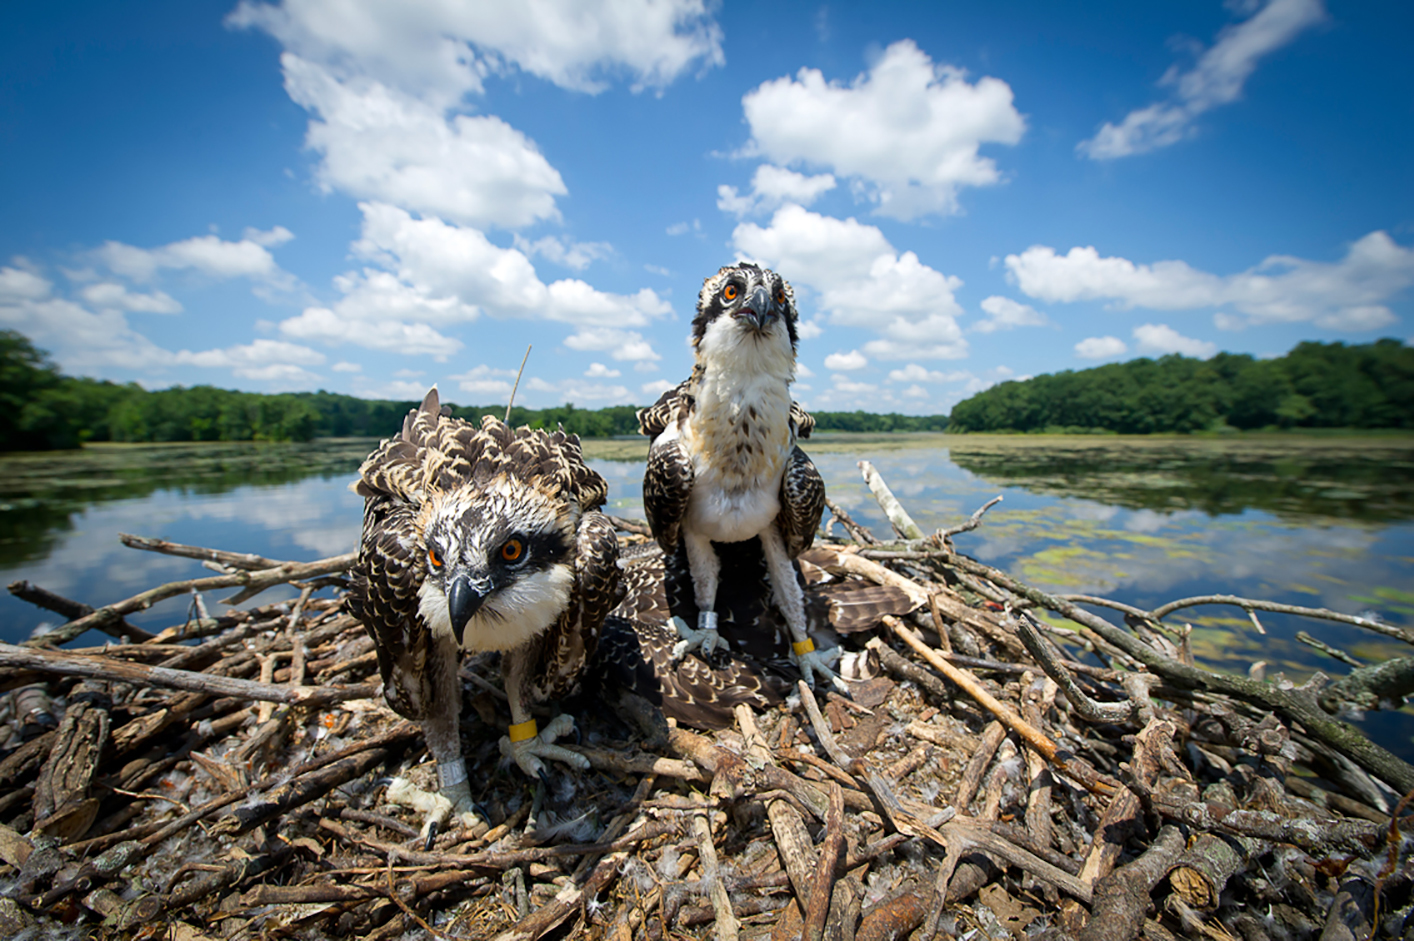 Michigan’s osprey population, once threatened, is making a comeback with support from the Nongame Wildlife Fund.